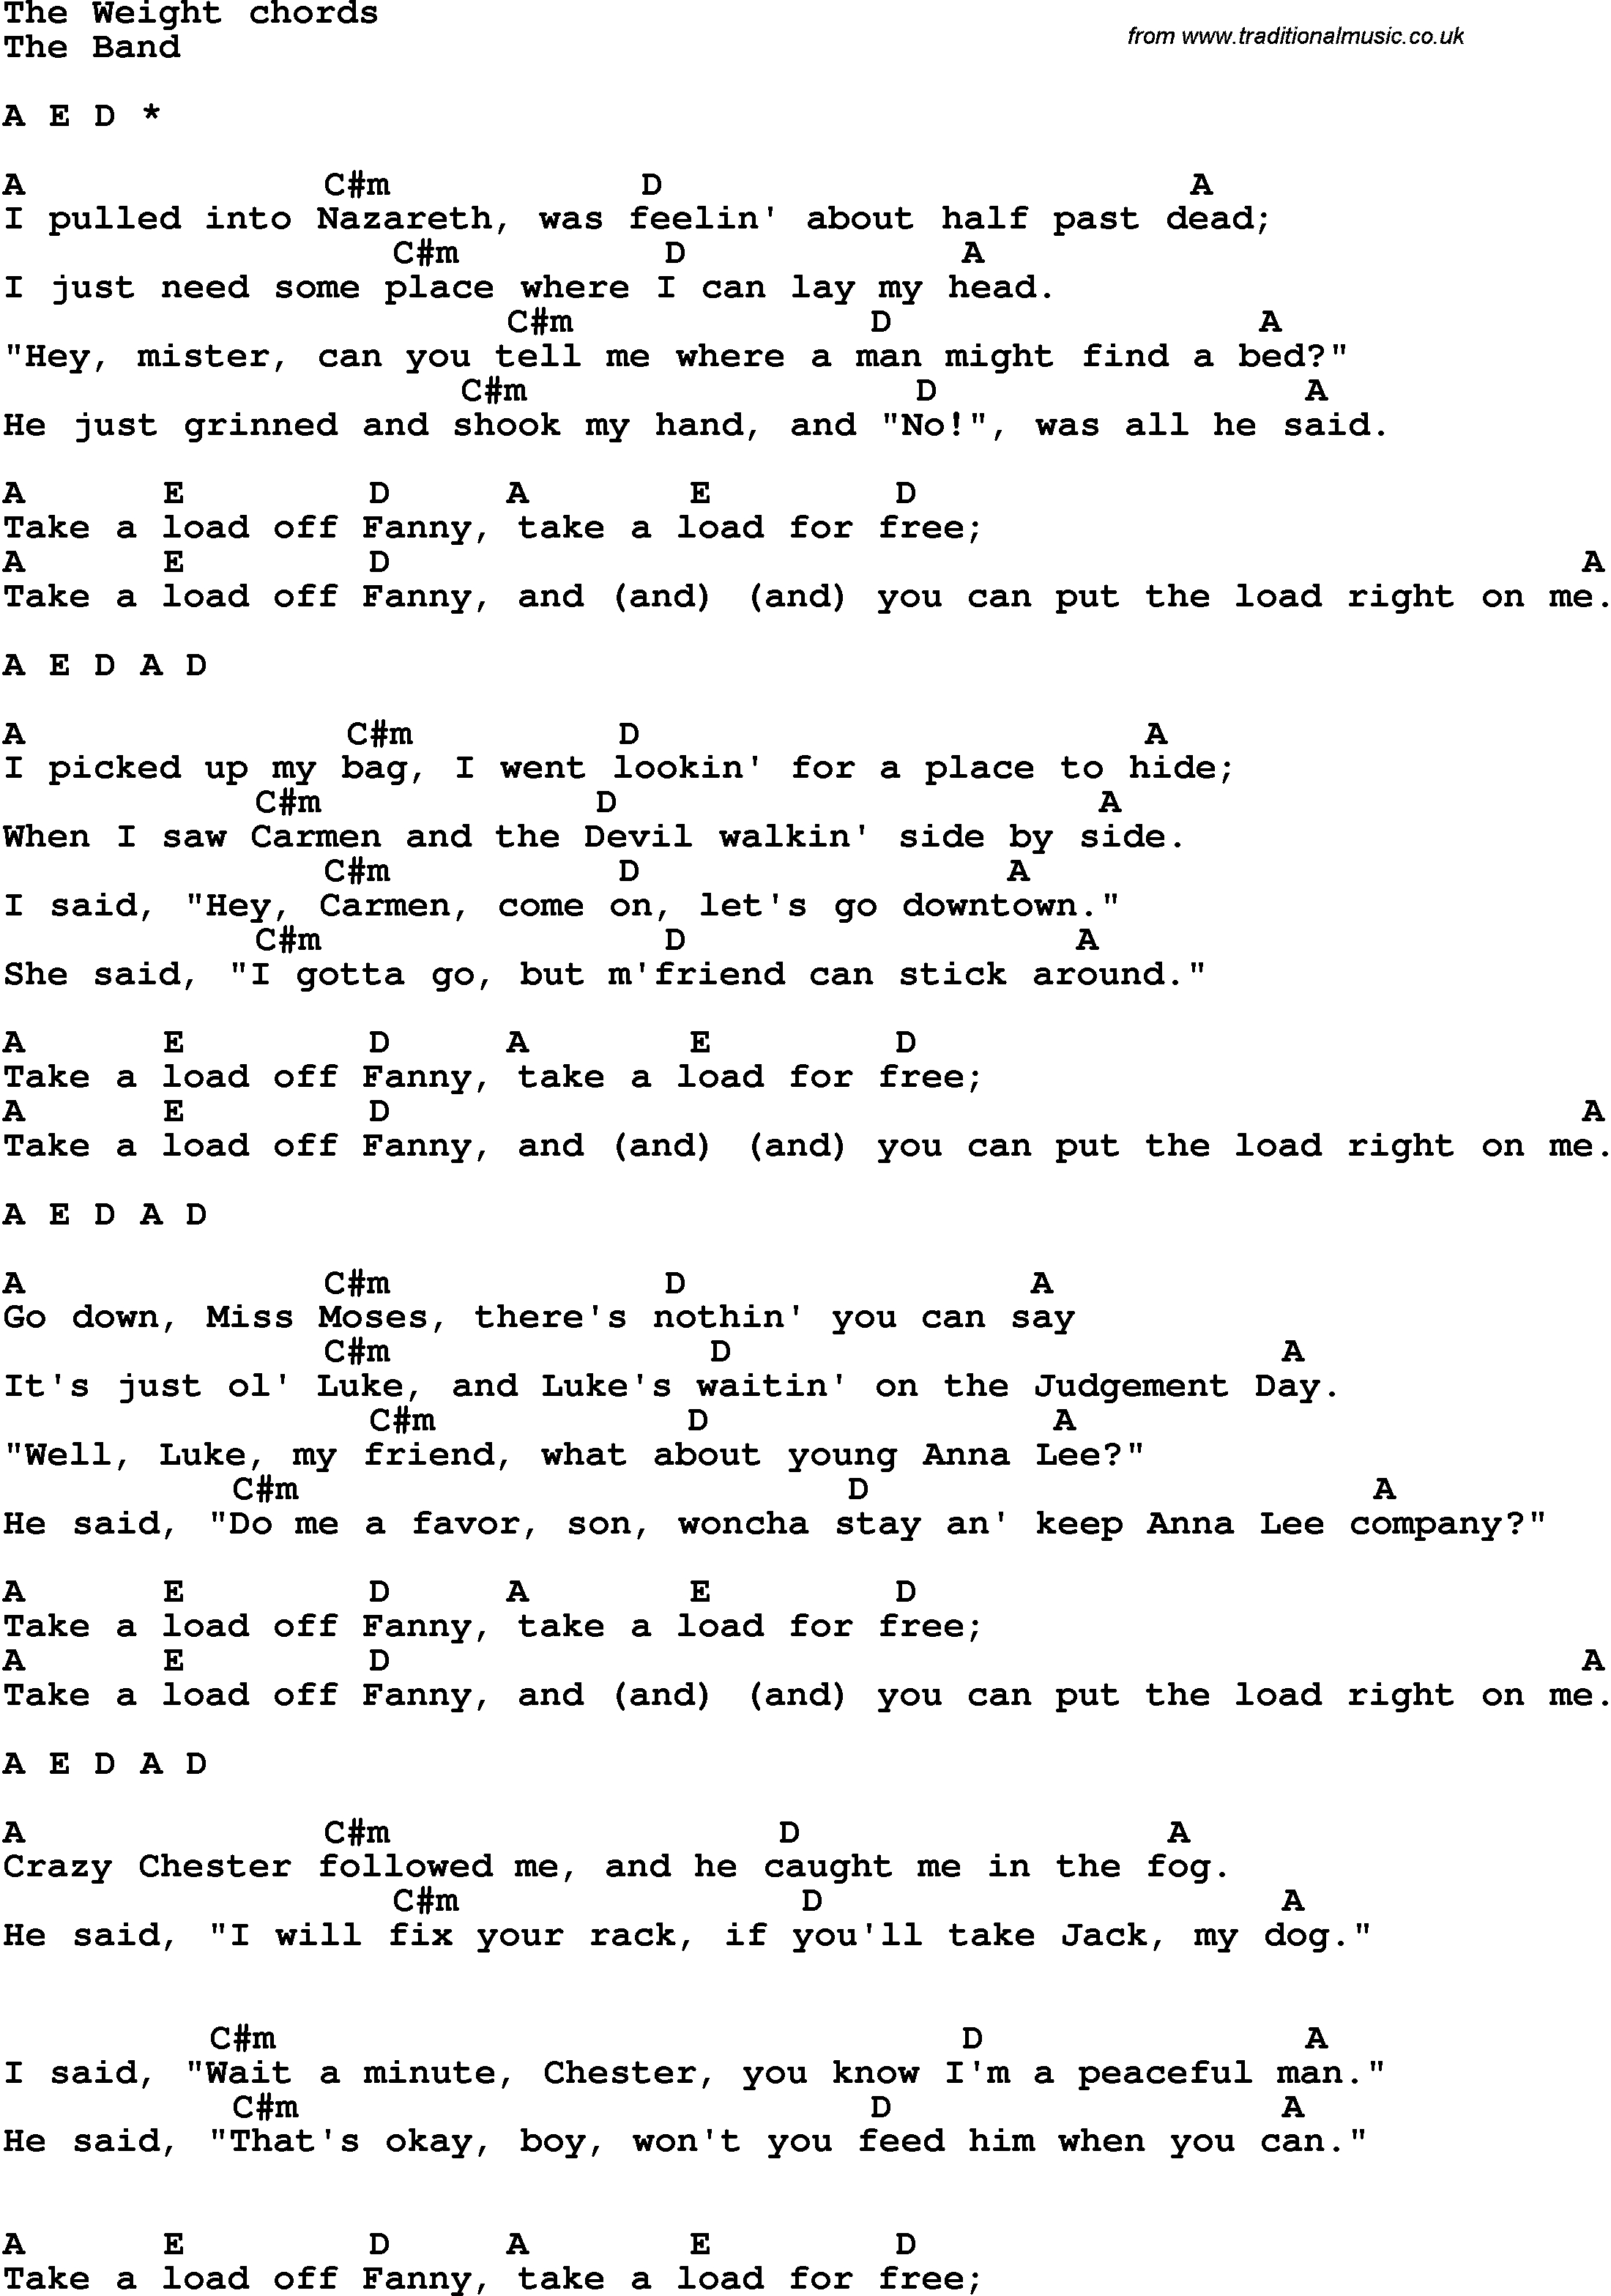 The Weight Chords Song Lyrics With Guitar Chords For The Weight The Band